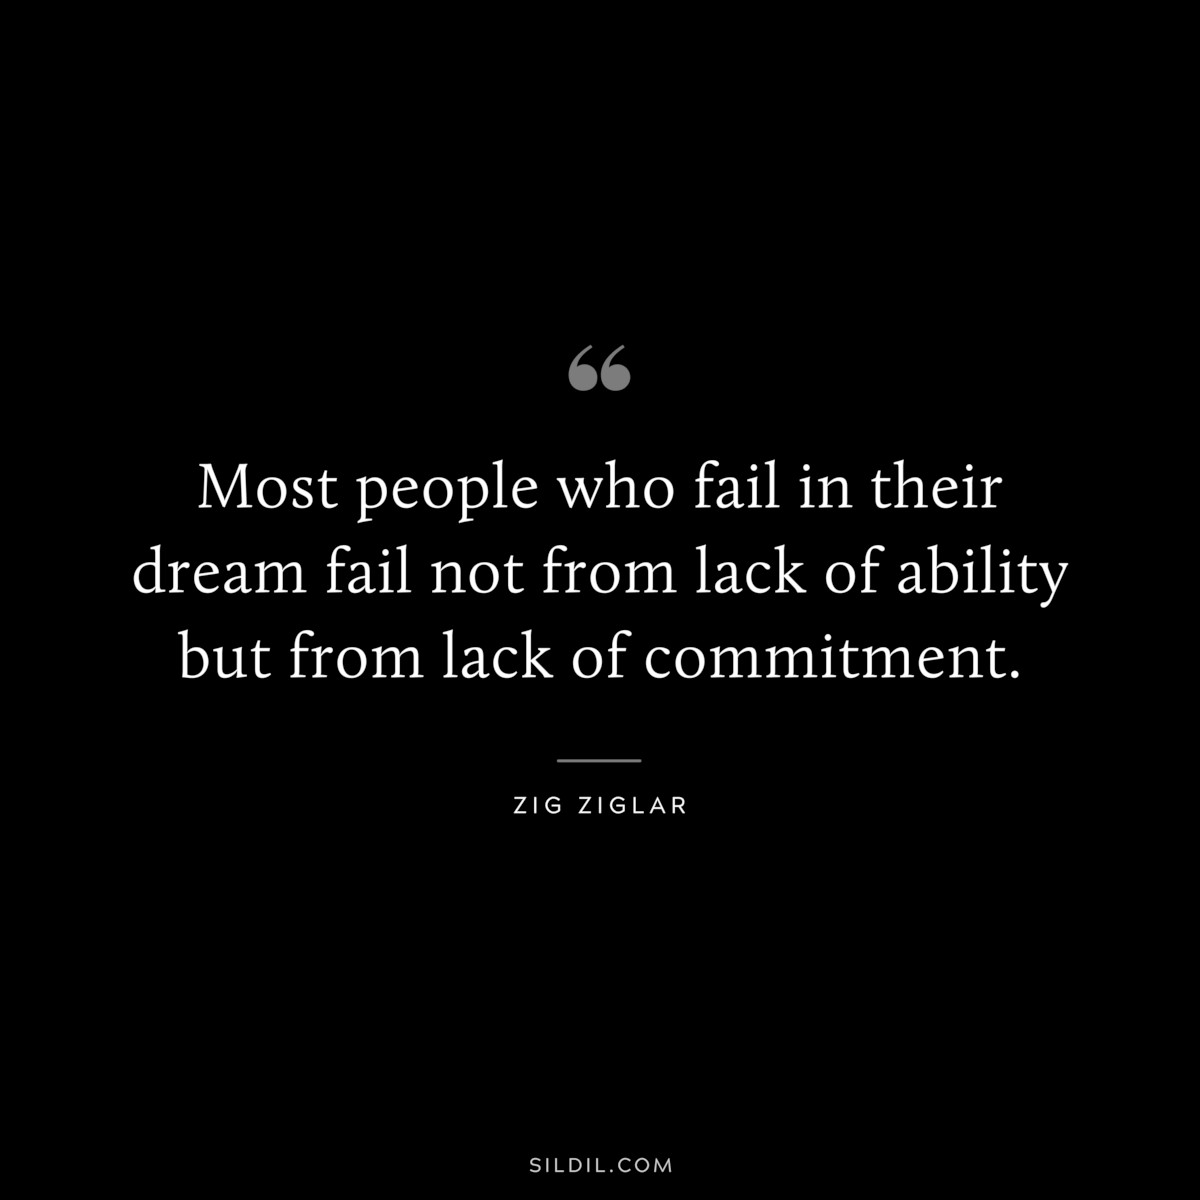 Most people who fail in their dream fail not from lack of ability but from lack of commitment. ― Zig Ziglar